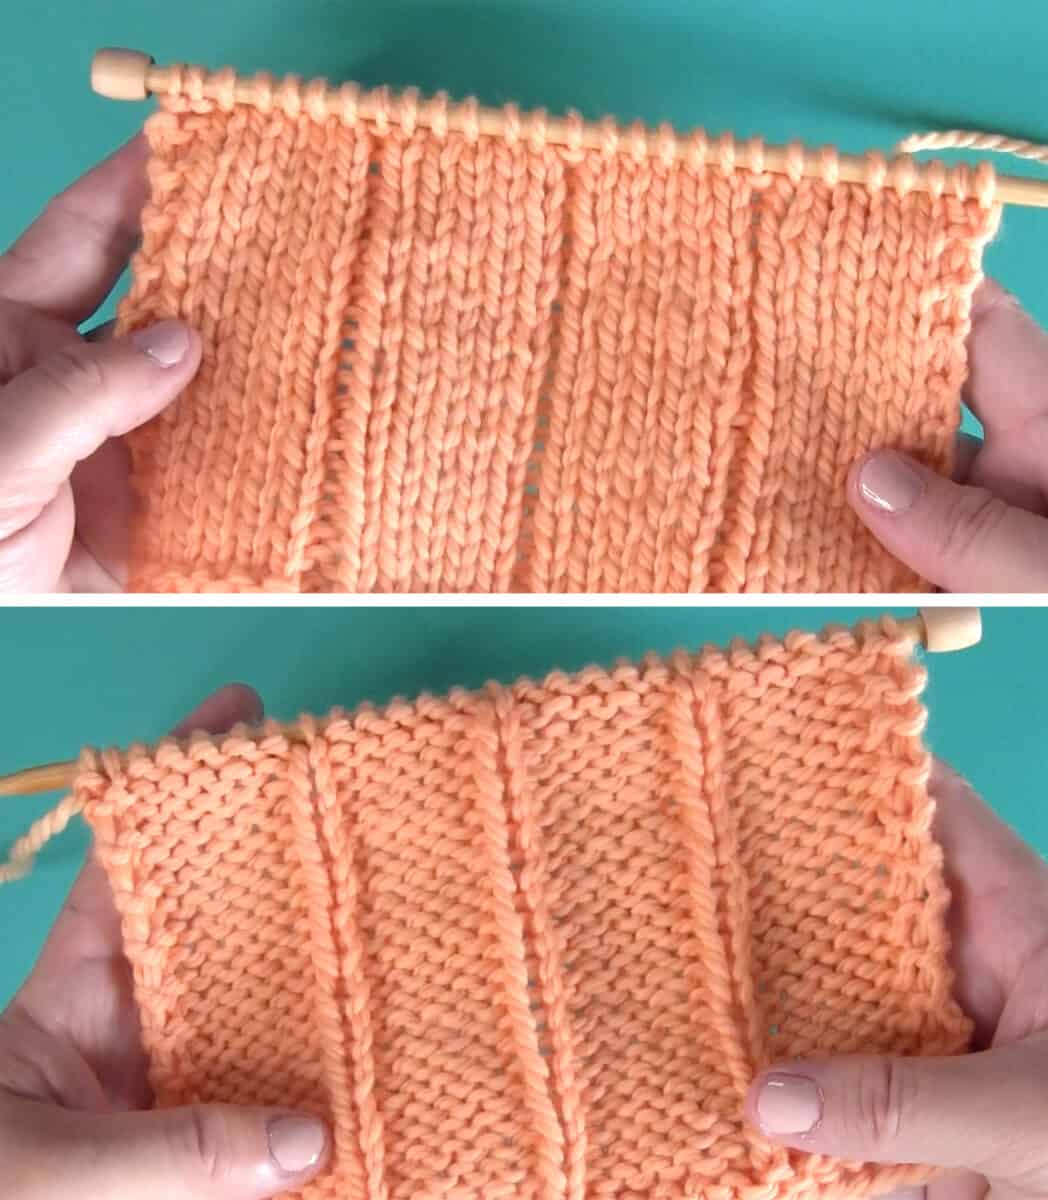 Right and Wrong sides of the 5x1 Flat Rib Stitch knitting pattern in orange color yarn.